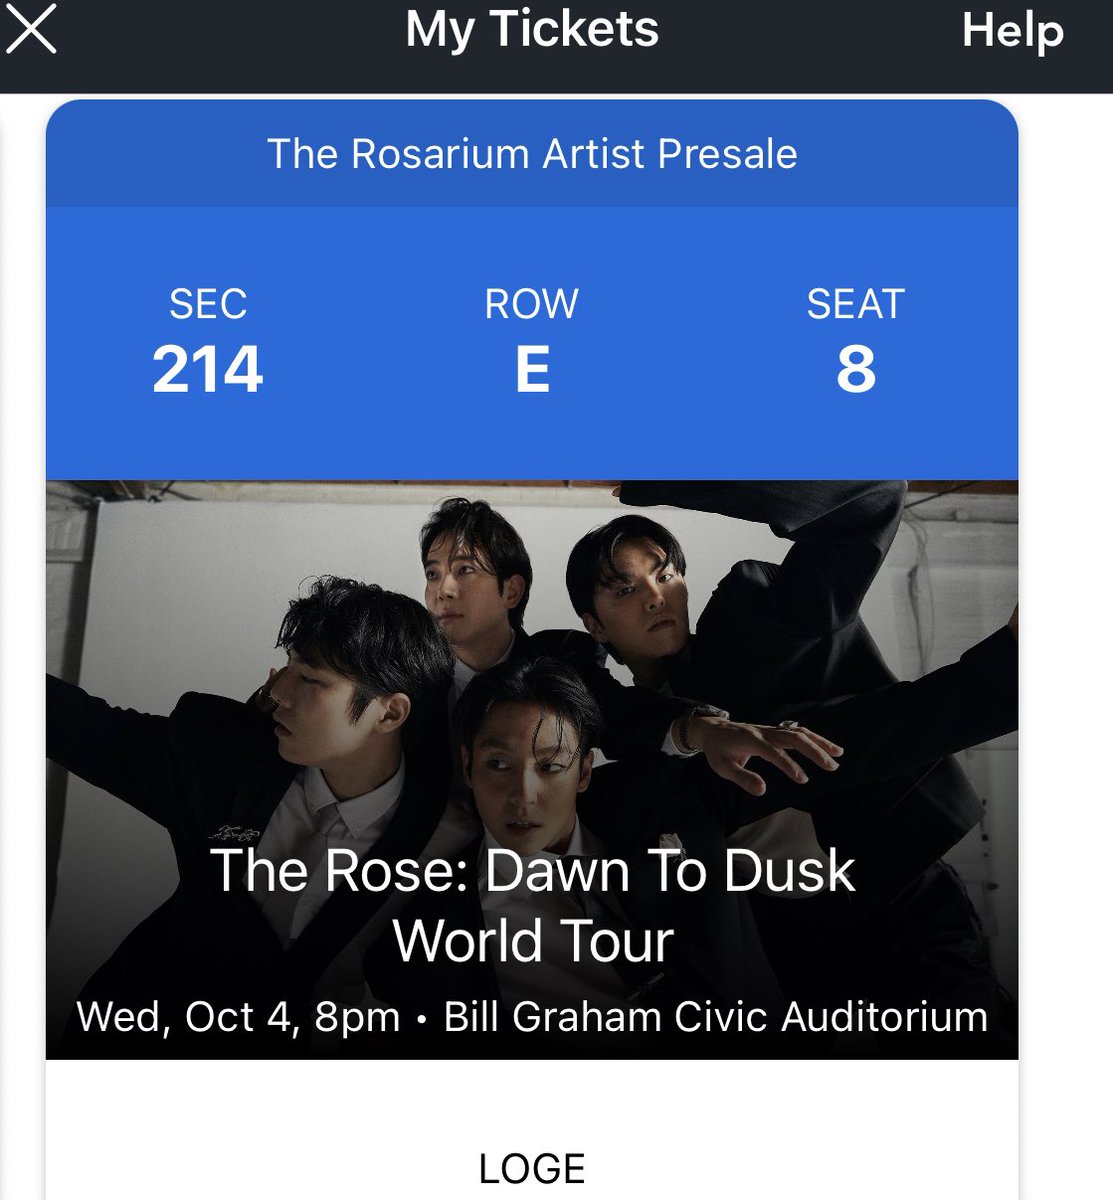 2 TICKETS - GREAT SEATS NEED TO SELL - BEST OFFER #theroseinsf THE ROSE IN SF TODAY 10-4-23 8:00pm Loge 214, row E, seats 7, 8 Face value: $85 ea. LAST MINUTE? OK! Can meet you at the venue before show and transfer to you. I have tickets in a different section - I’ll be there!